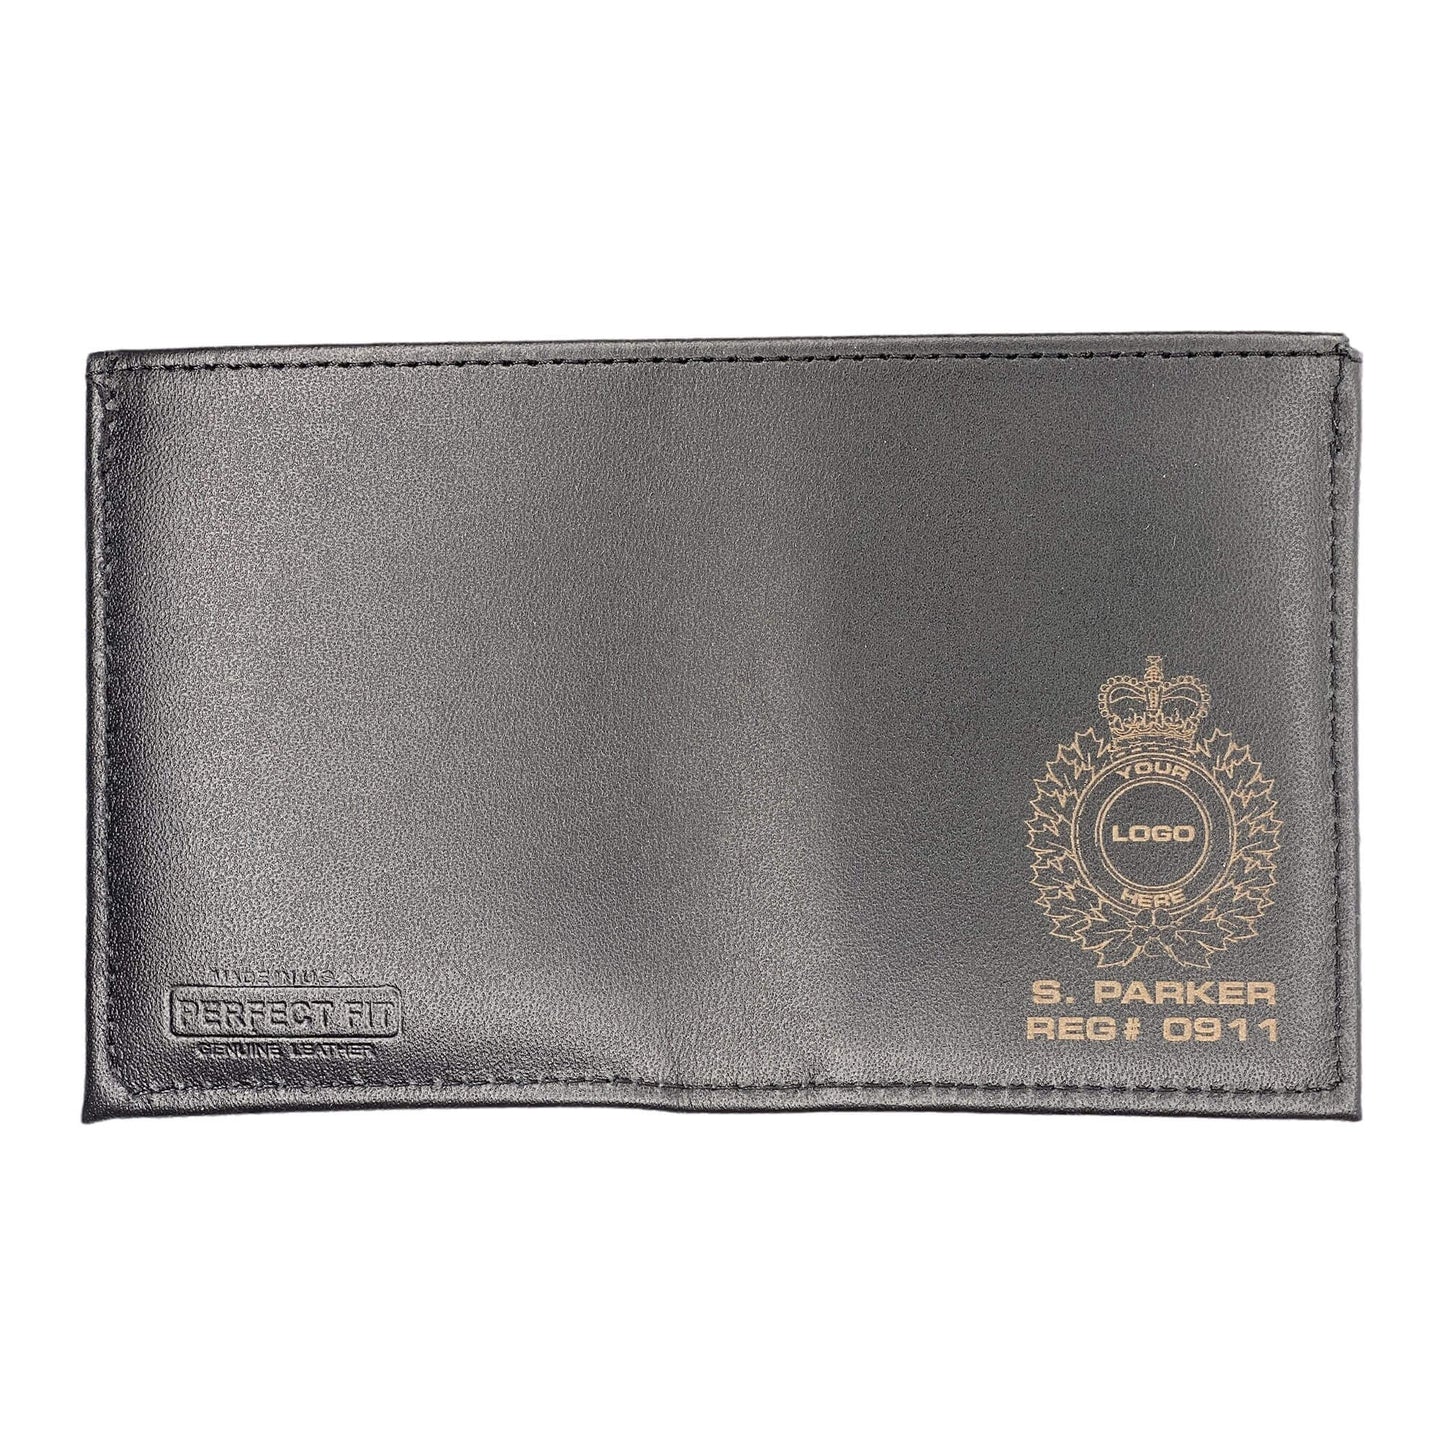 Department of Fishery and Oceans Canada Badge Wallet